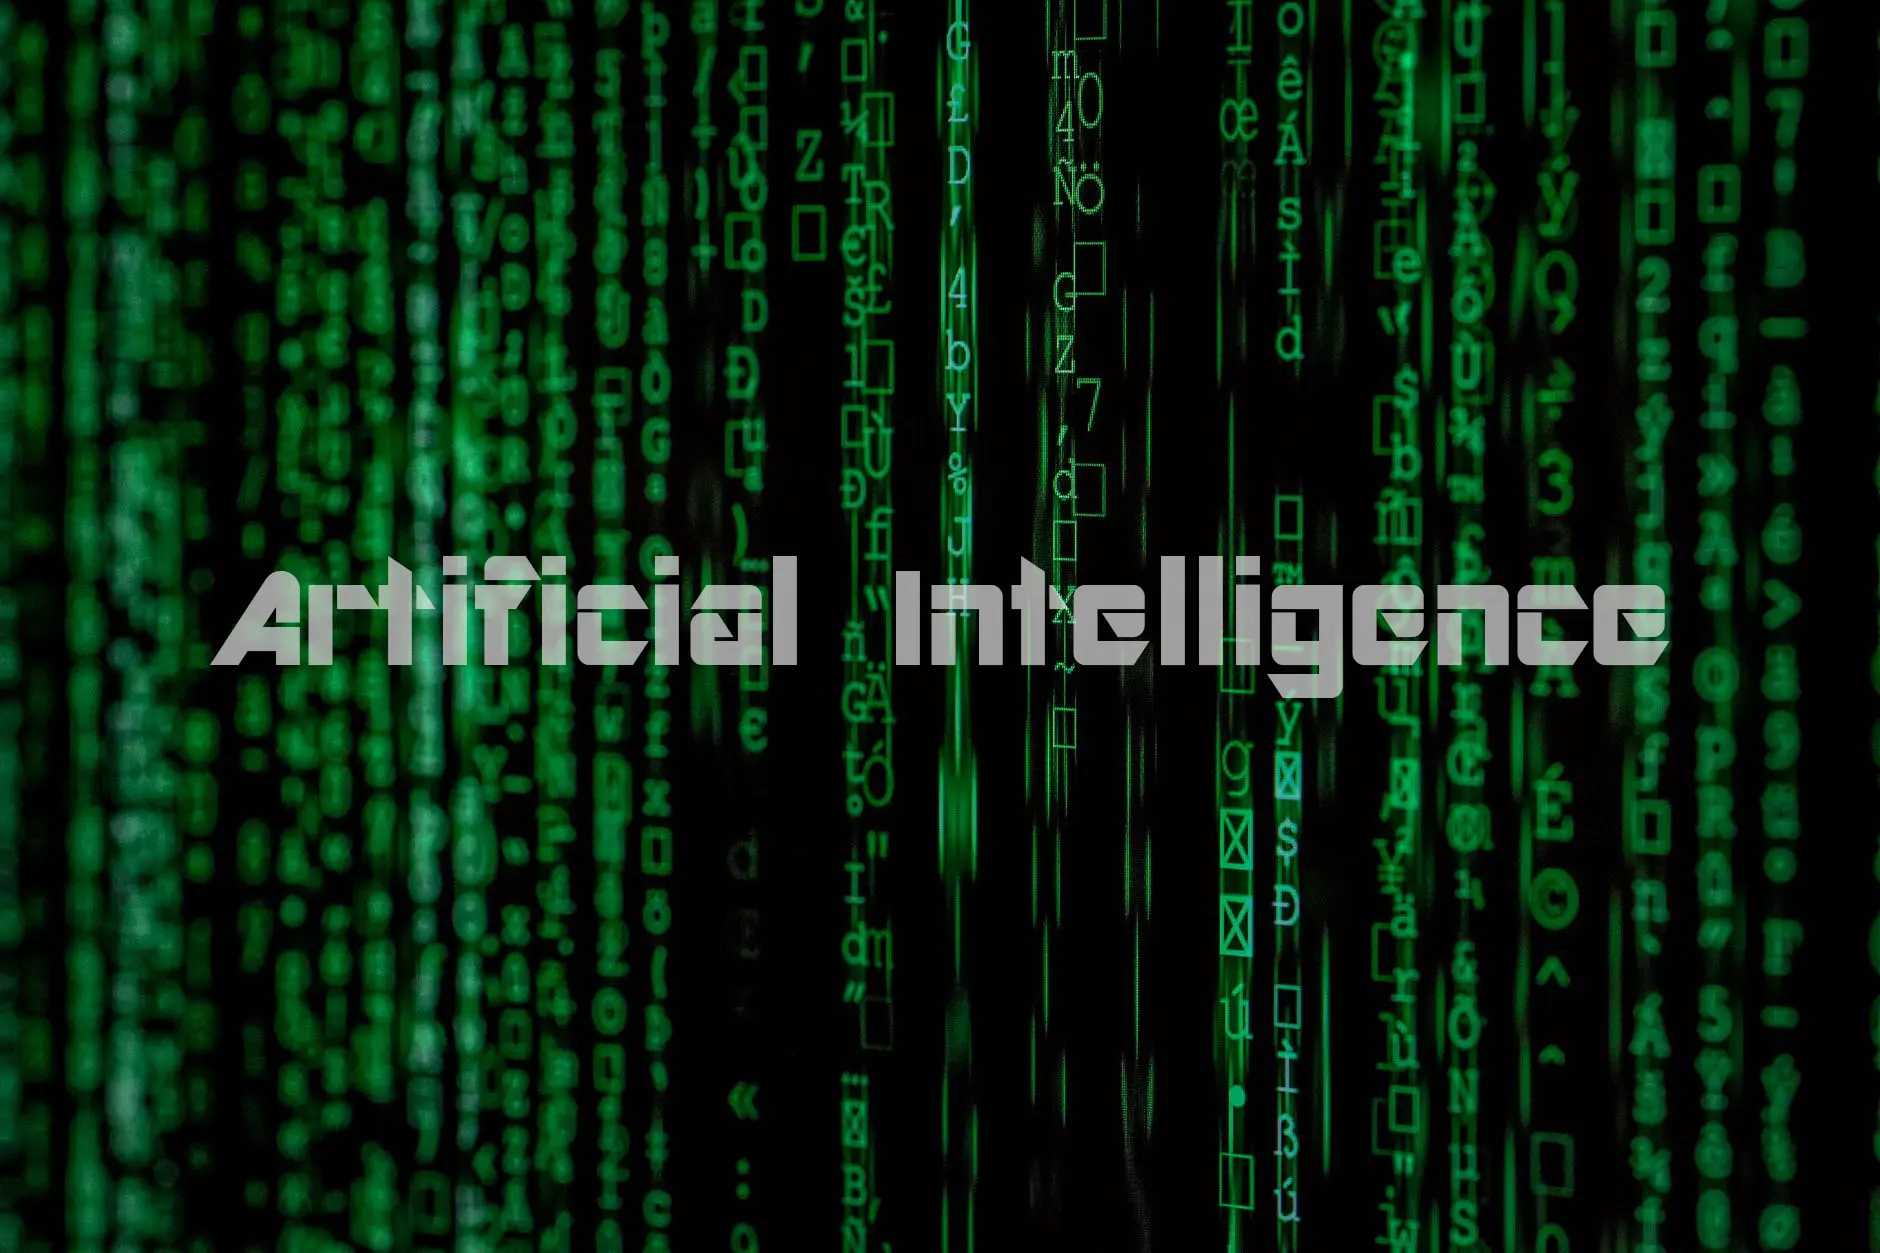 An image showing a text Artificial intelligence with Cryptic text in the background.